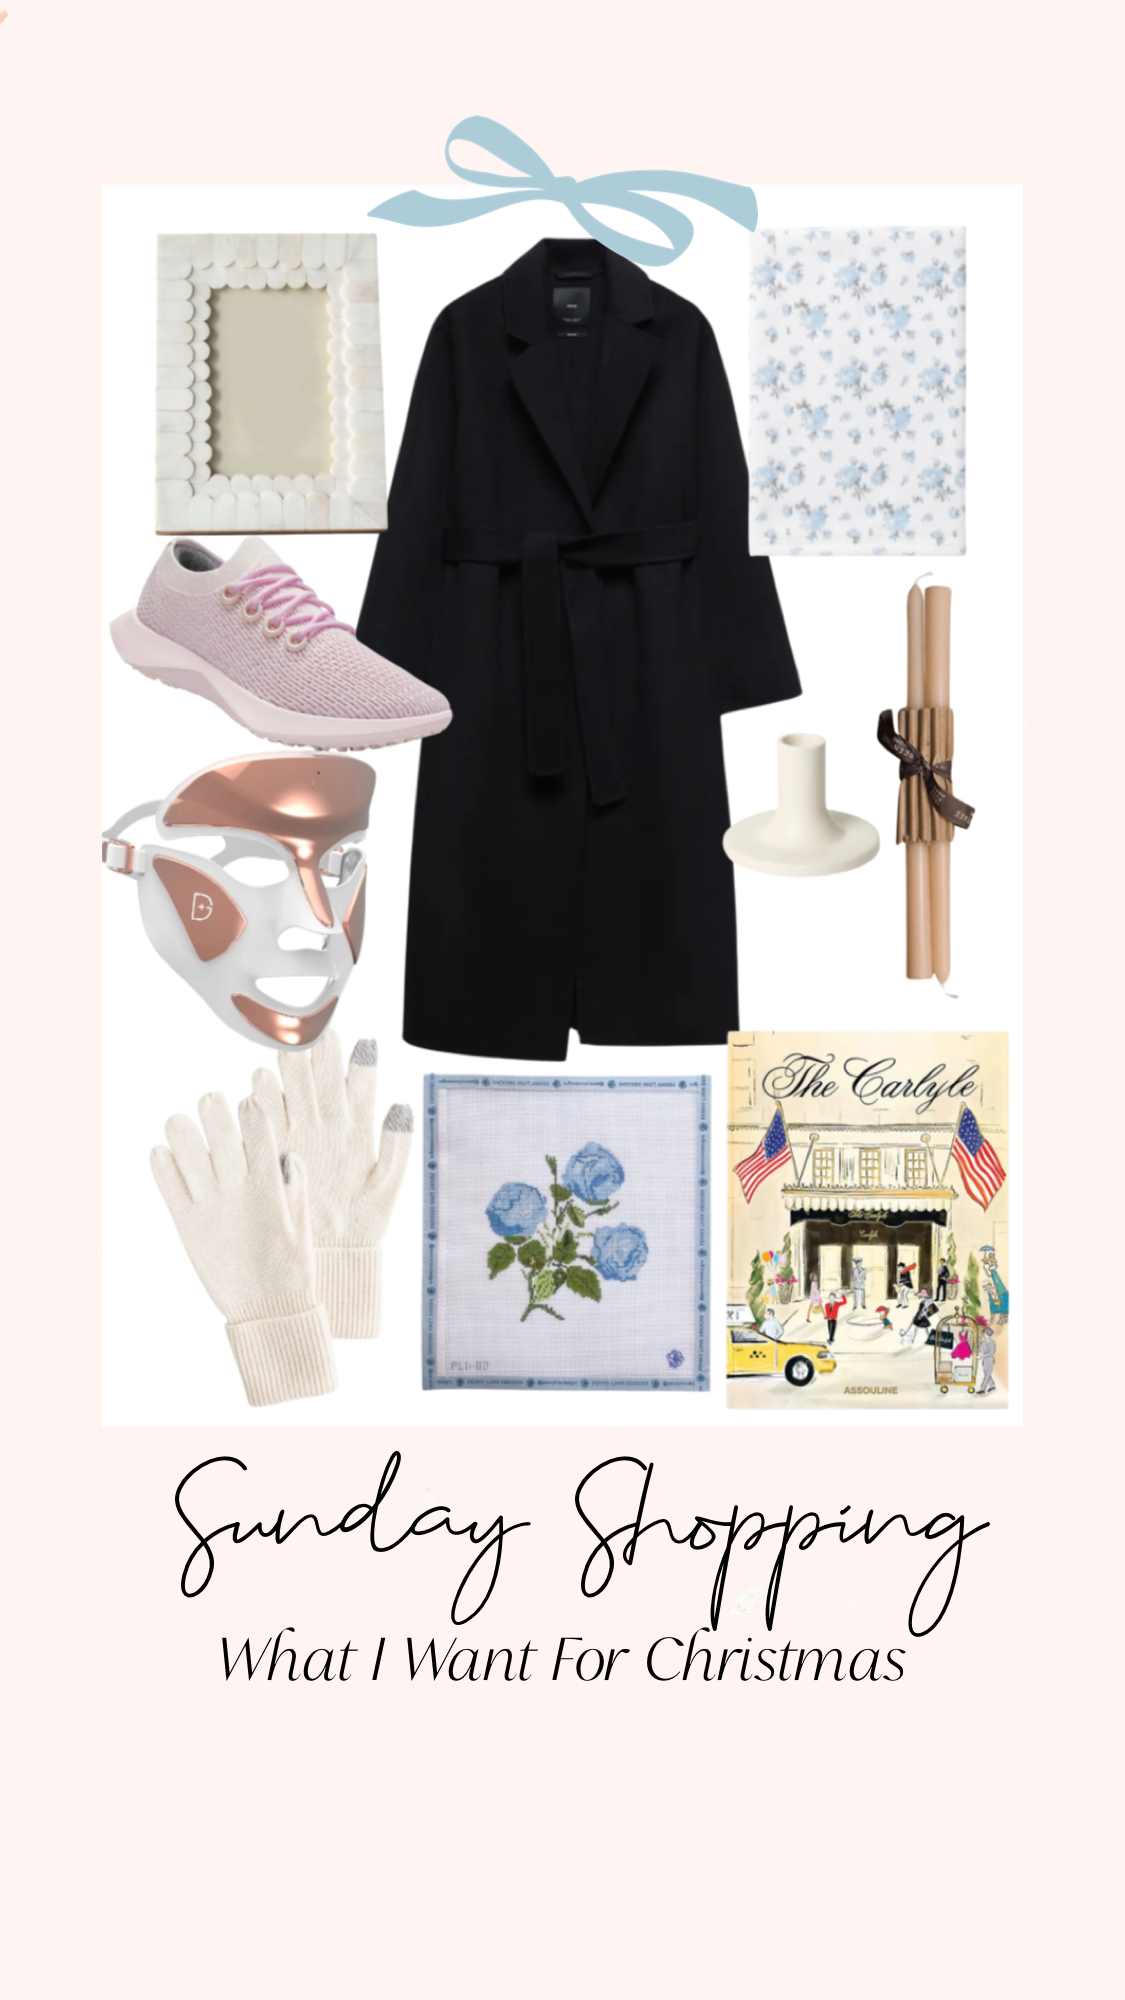 Sunday Shopping: What I Want For Christmas